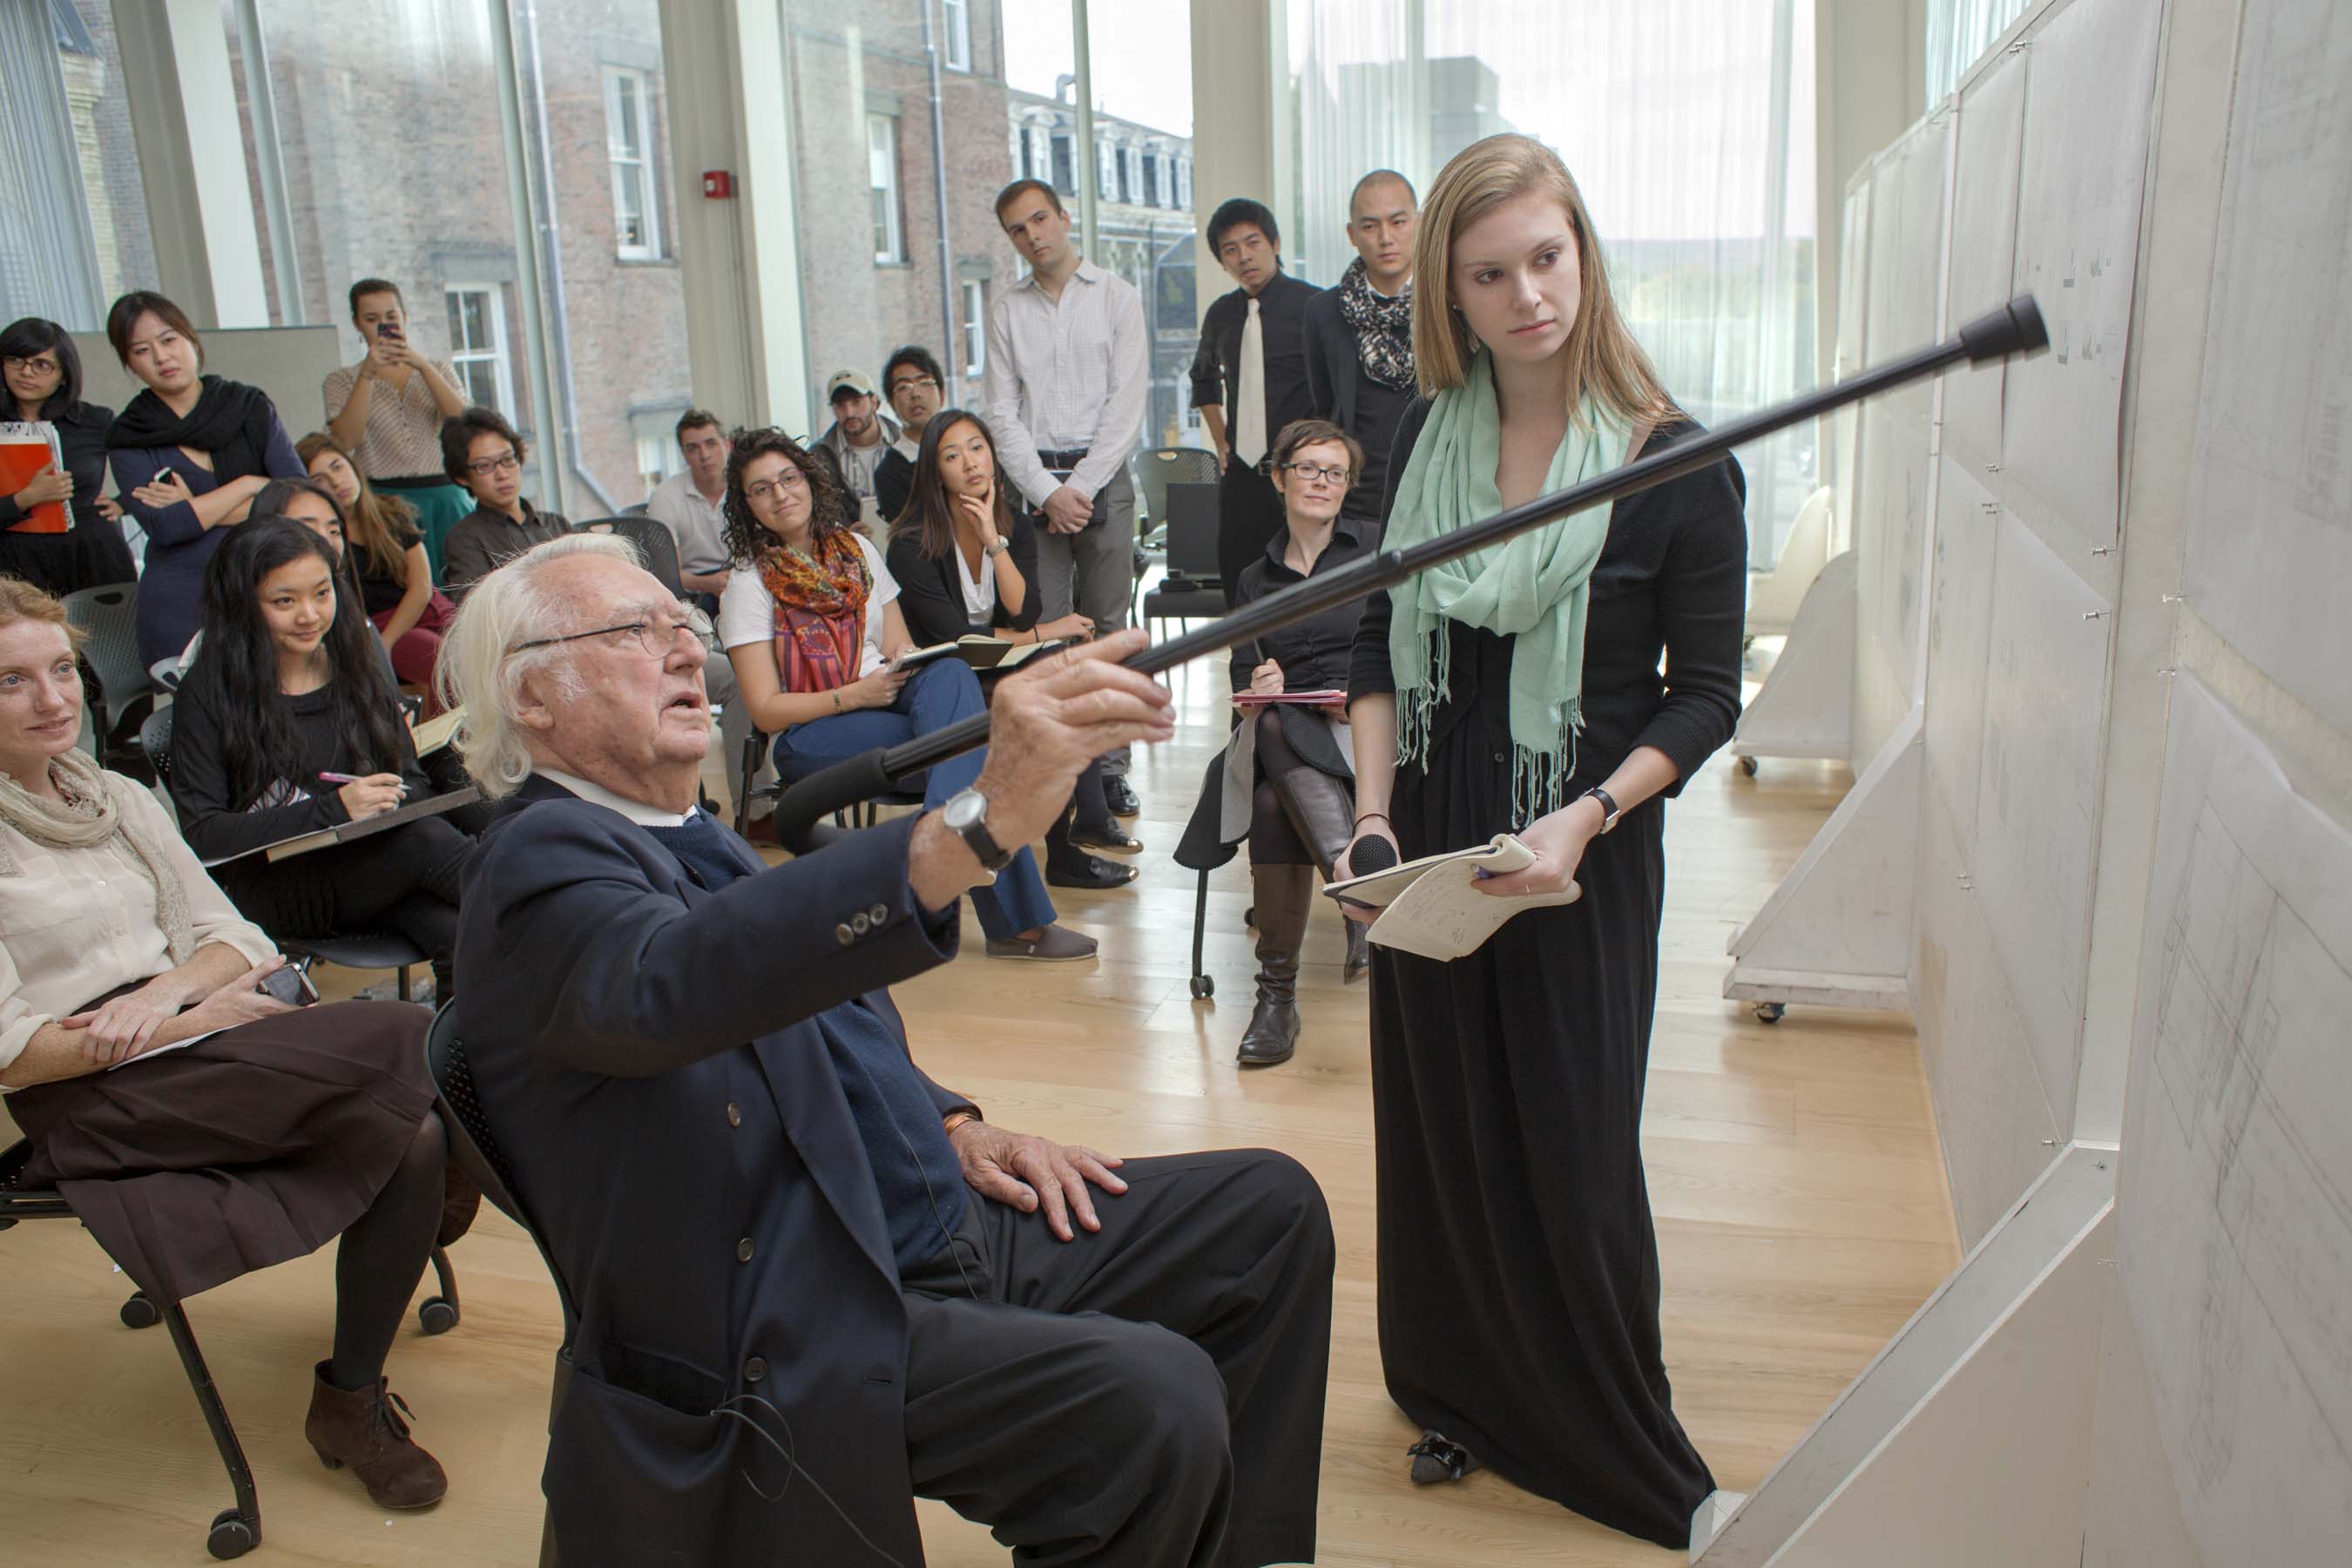 The Getty, Sotheby's, and Other Institutions Swiftly Cut Ties With Richard Meier ...2700 x 1800